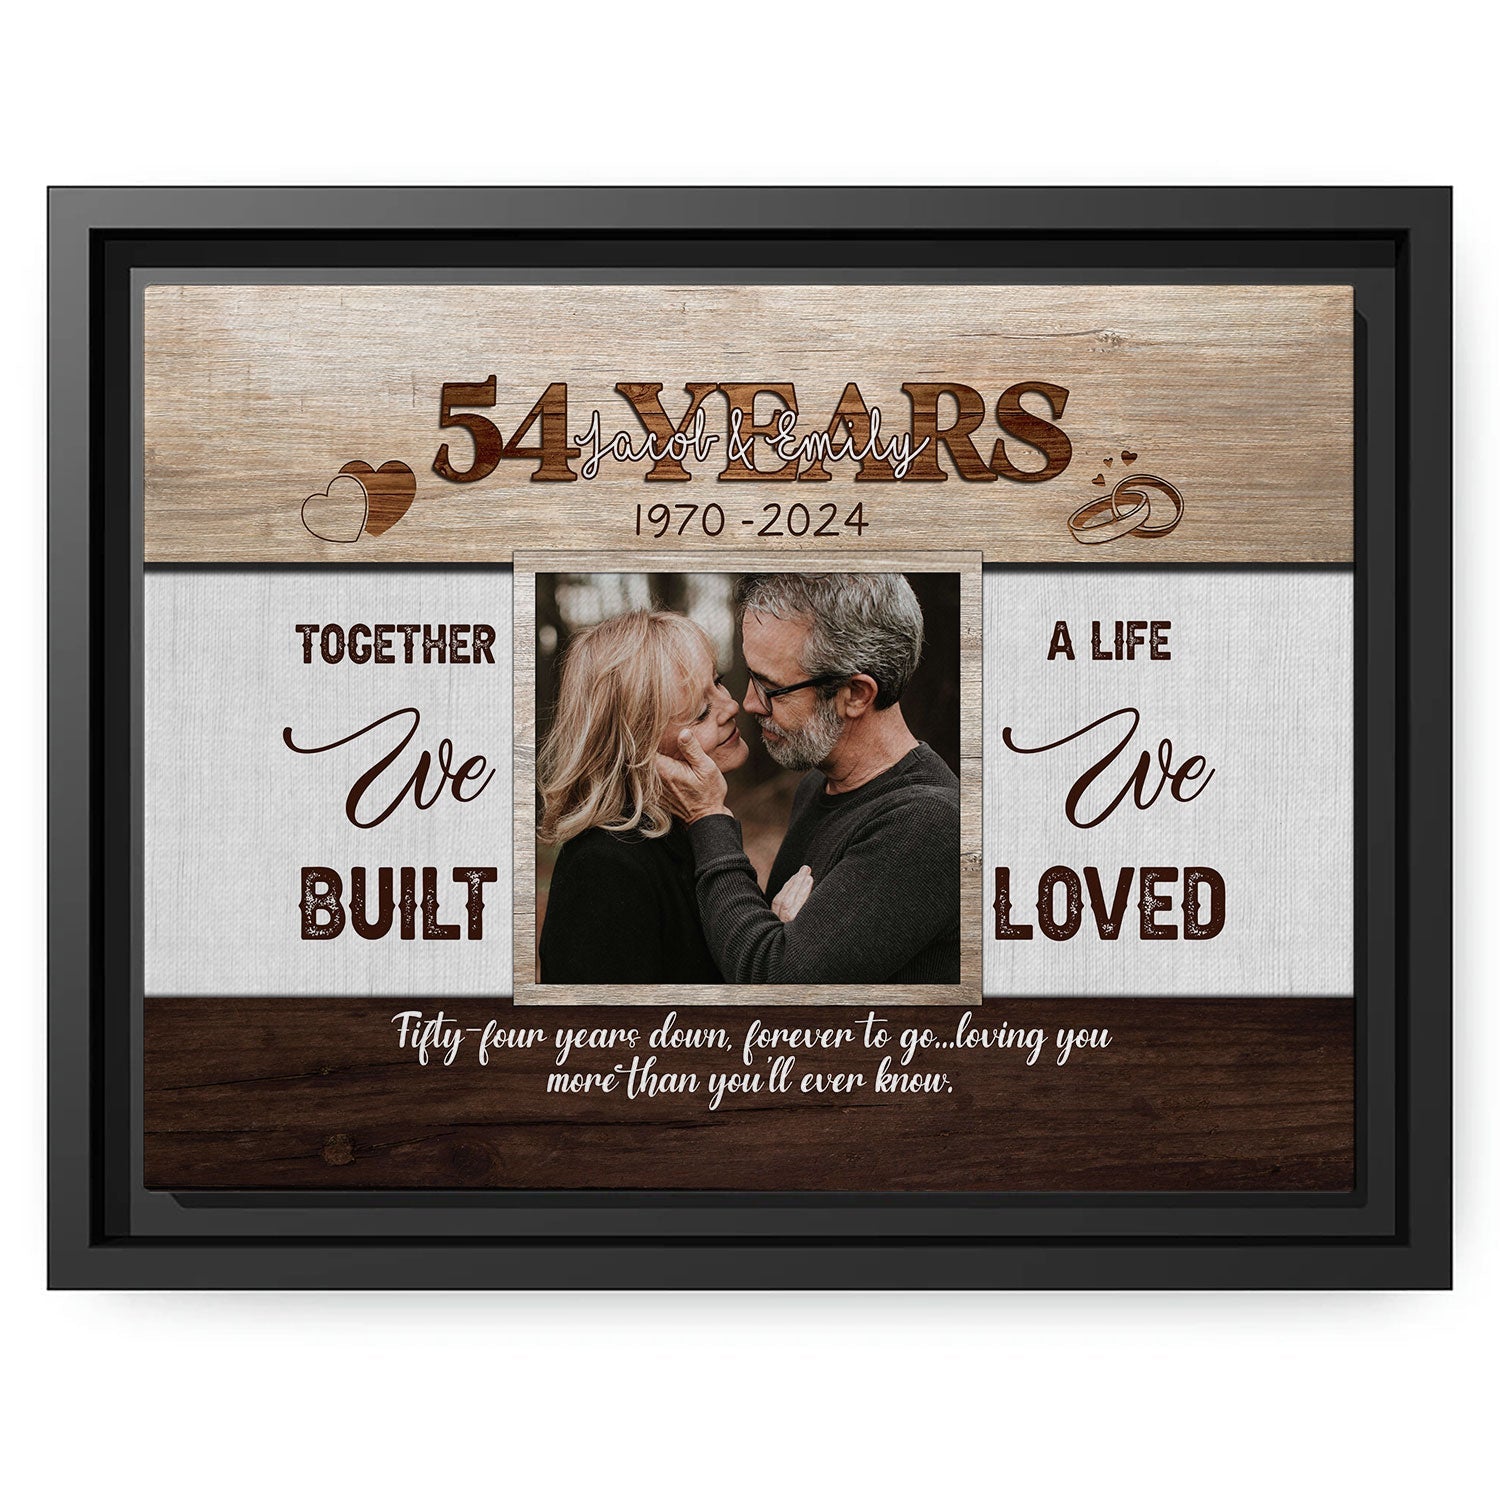 Fifty-four Years Forever To Go - Personalized 54 Year Anniversary gift For Husband or Wife - Custom Canvas Print - MyMindfulGifts